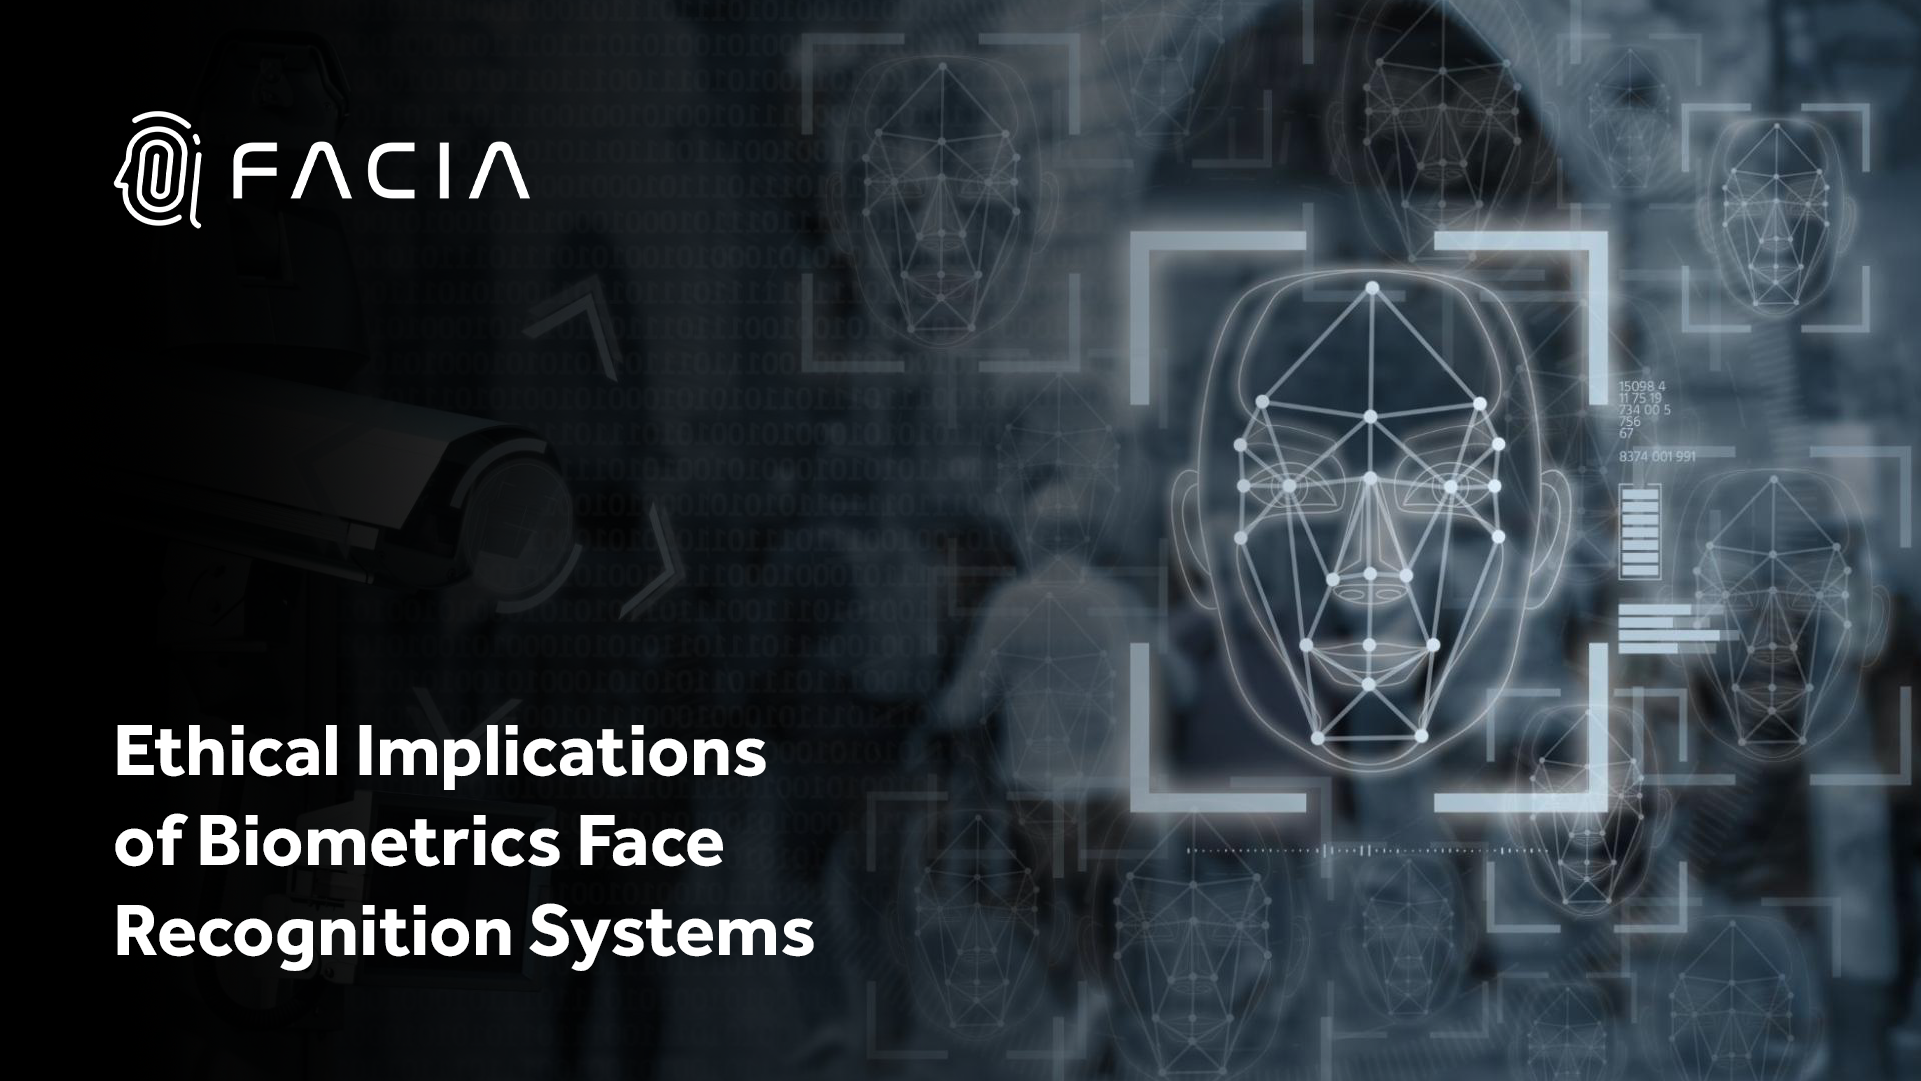 Ethical Implications of Biometrics Face Recognition Systems